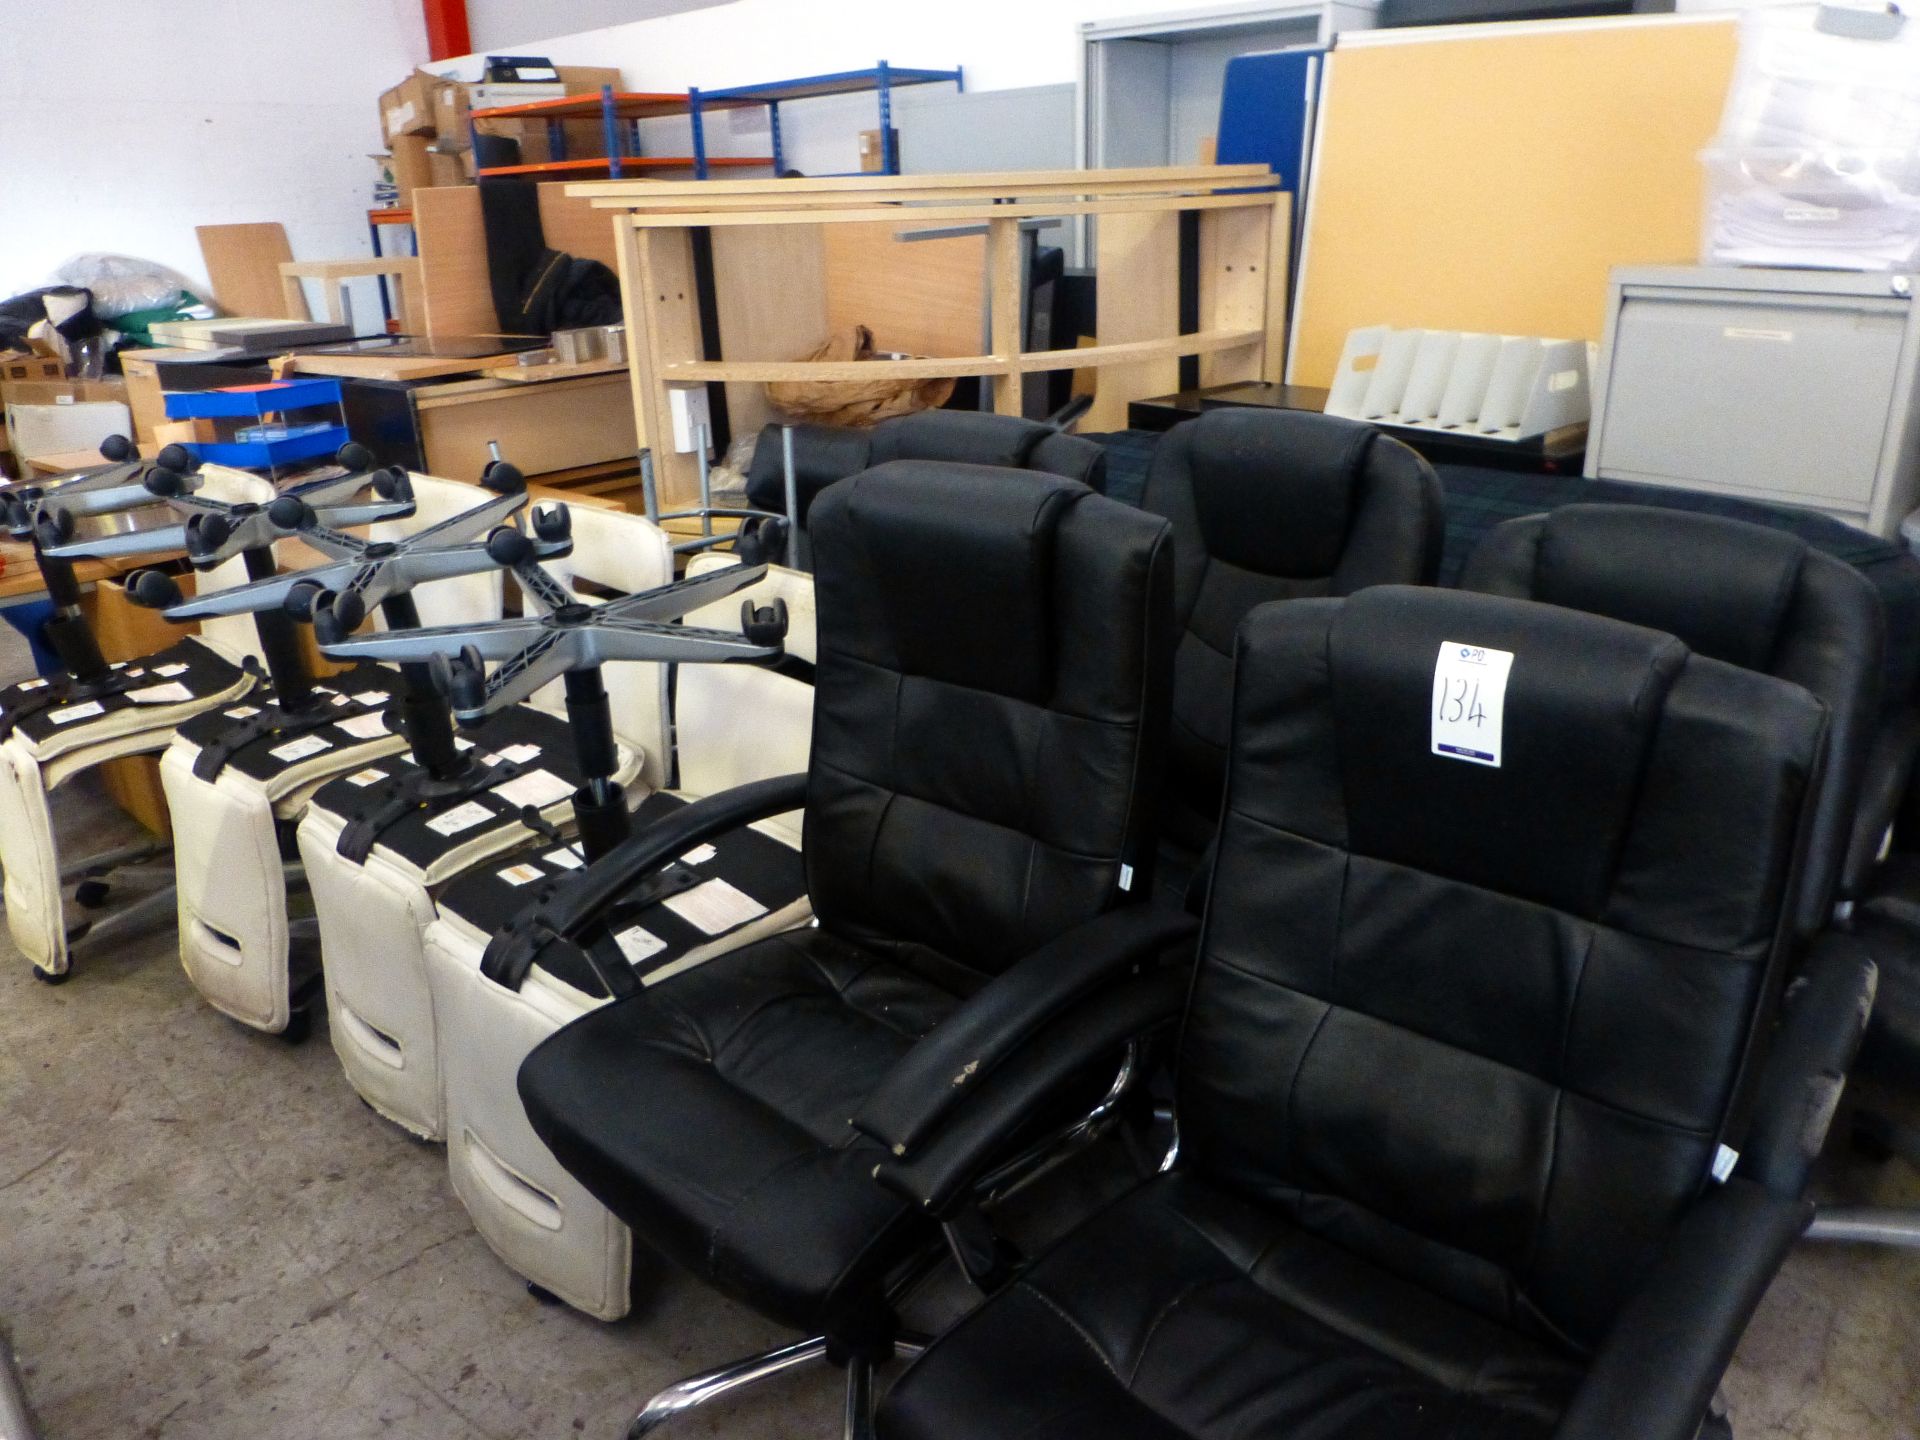 Large Quantity of Damaged/Worn Office & Recreational Furniture (Located 82 Rolfe Street, - Image 2 of 2